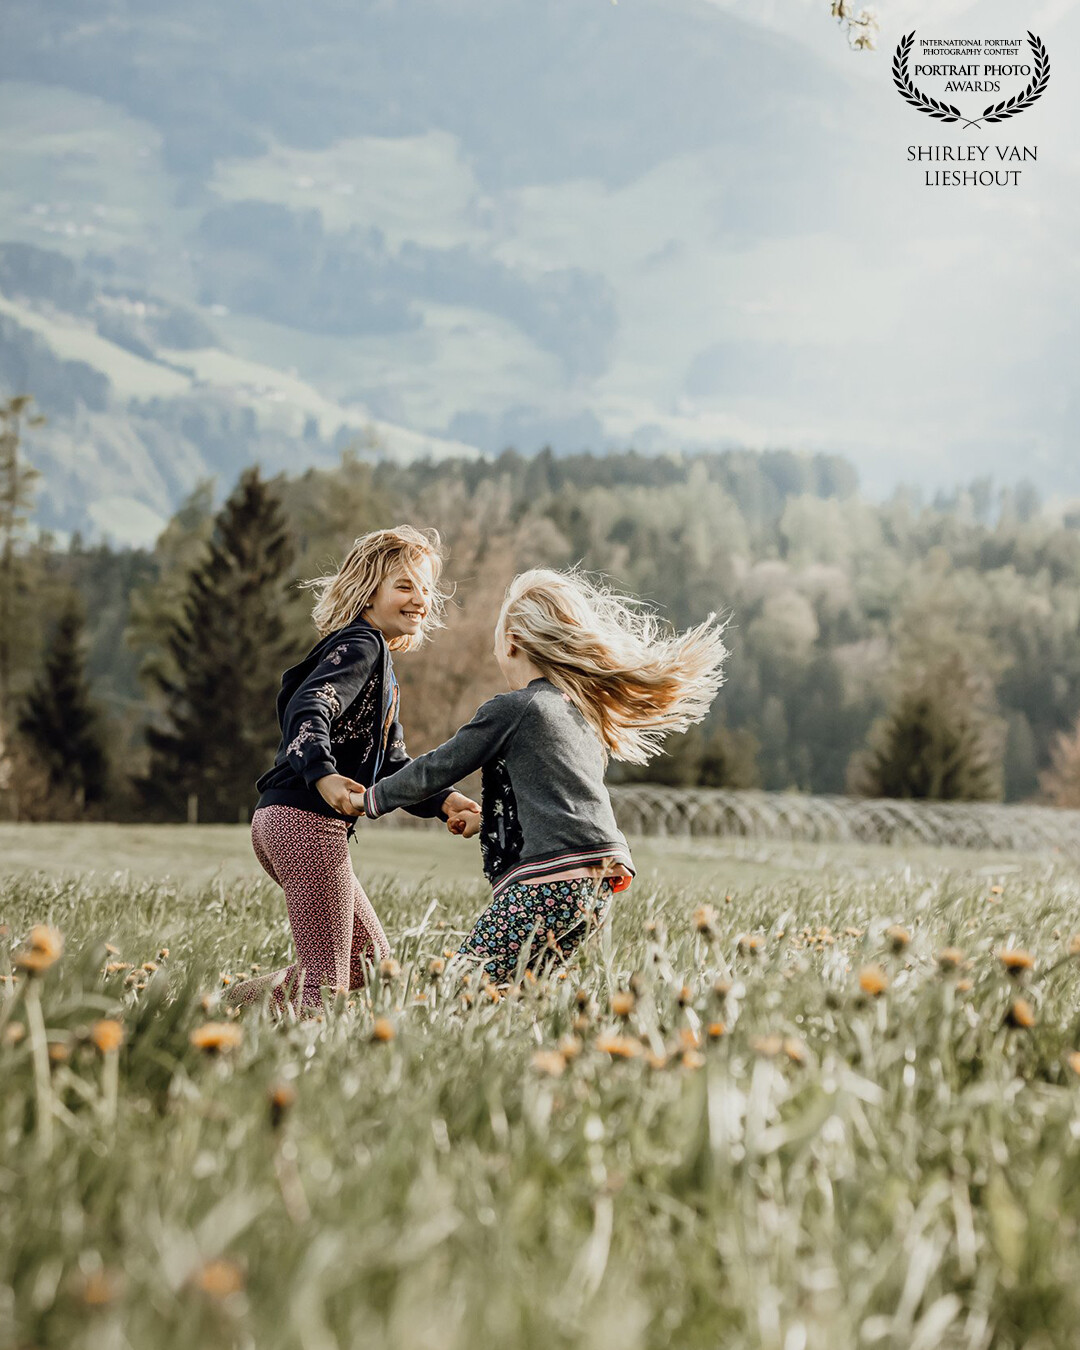 My 2 daughters playing together in the fields in Austria during our last holiday. This picture is so full of fun and laughter. I keep on smiling looking at this picture!